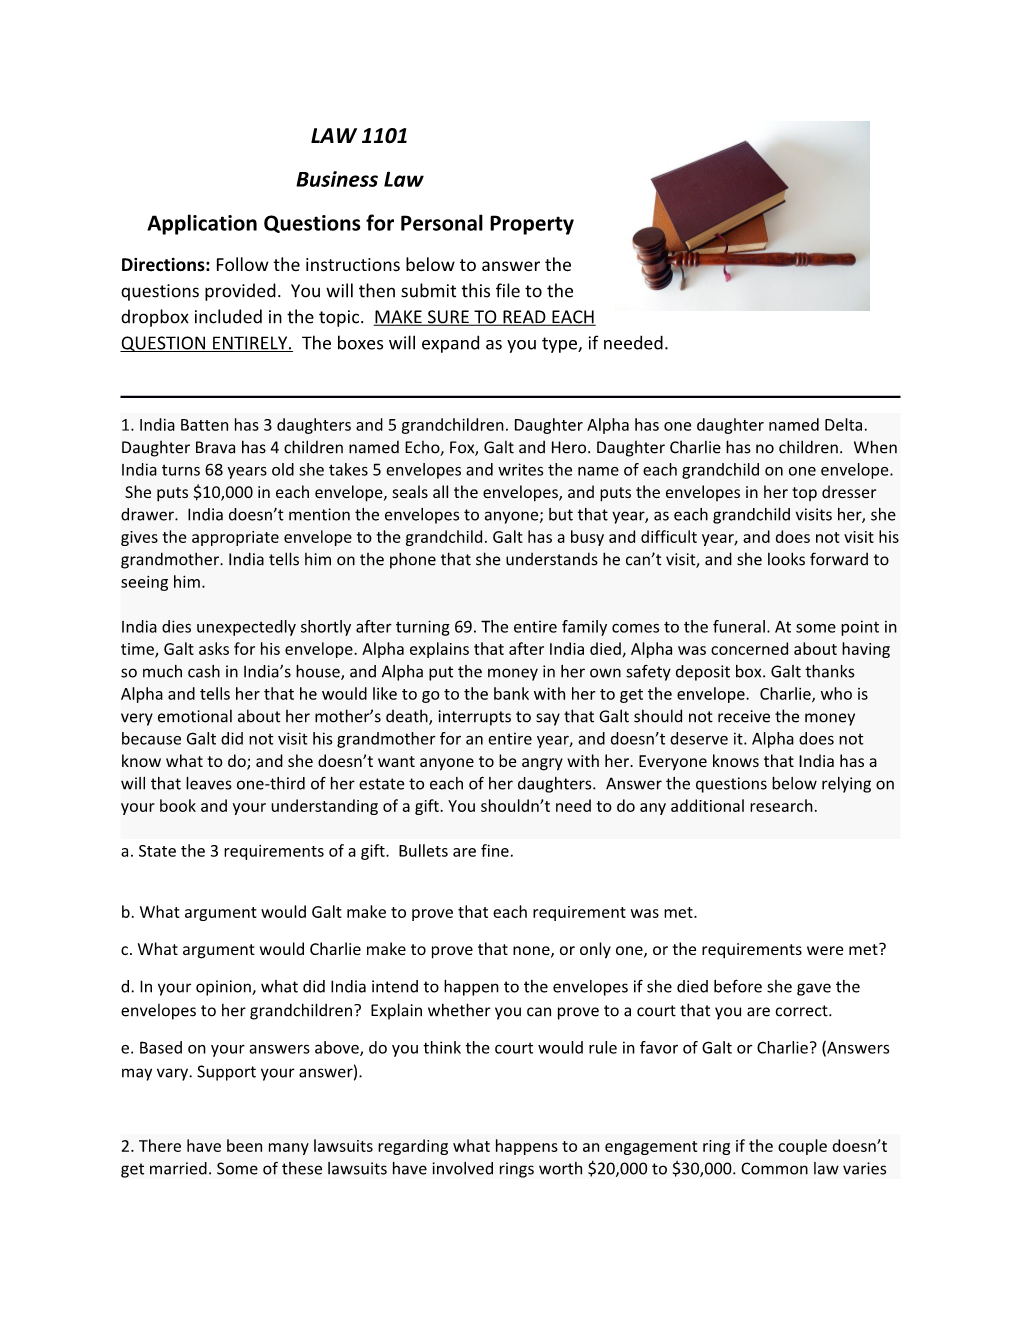 Application Questions for Personal Property